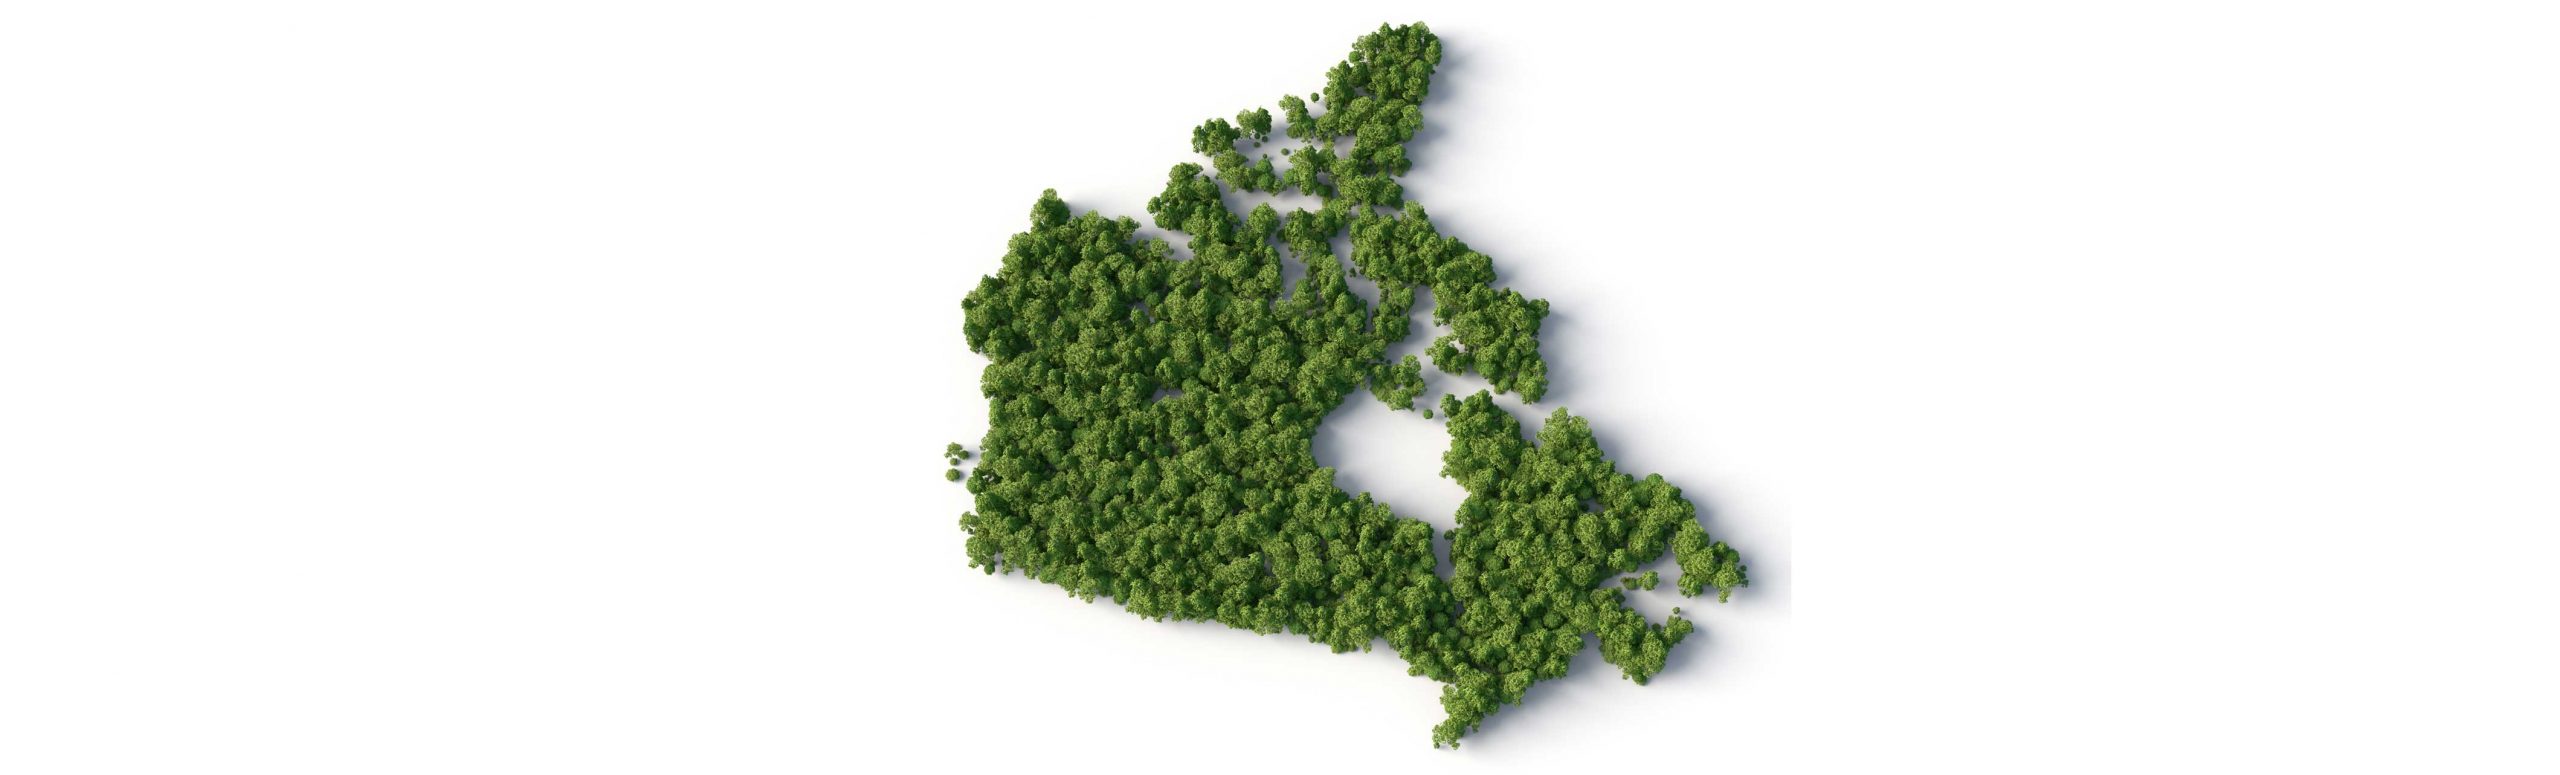 green plants in the shape of Canada